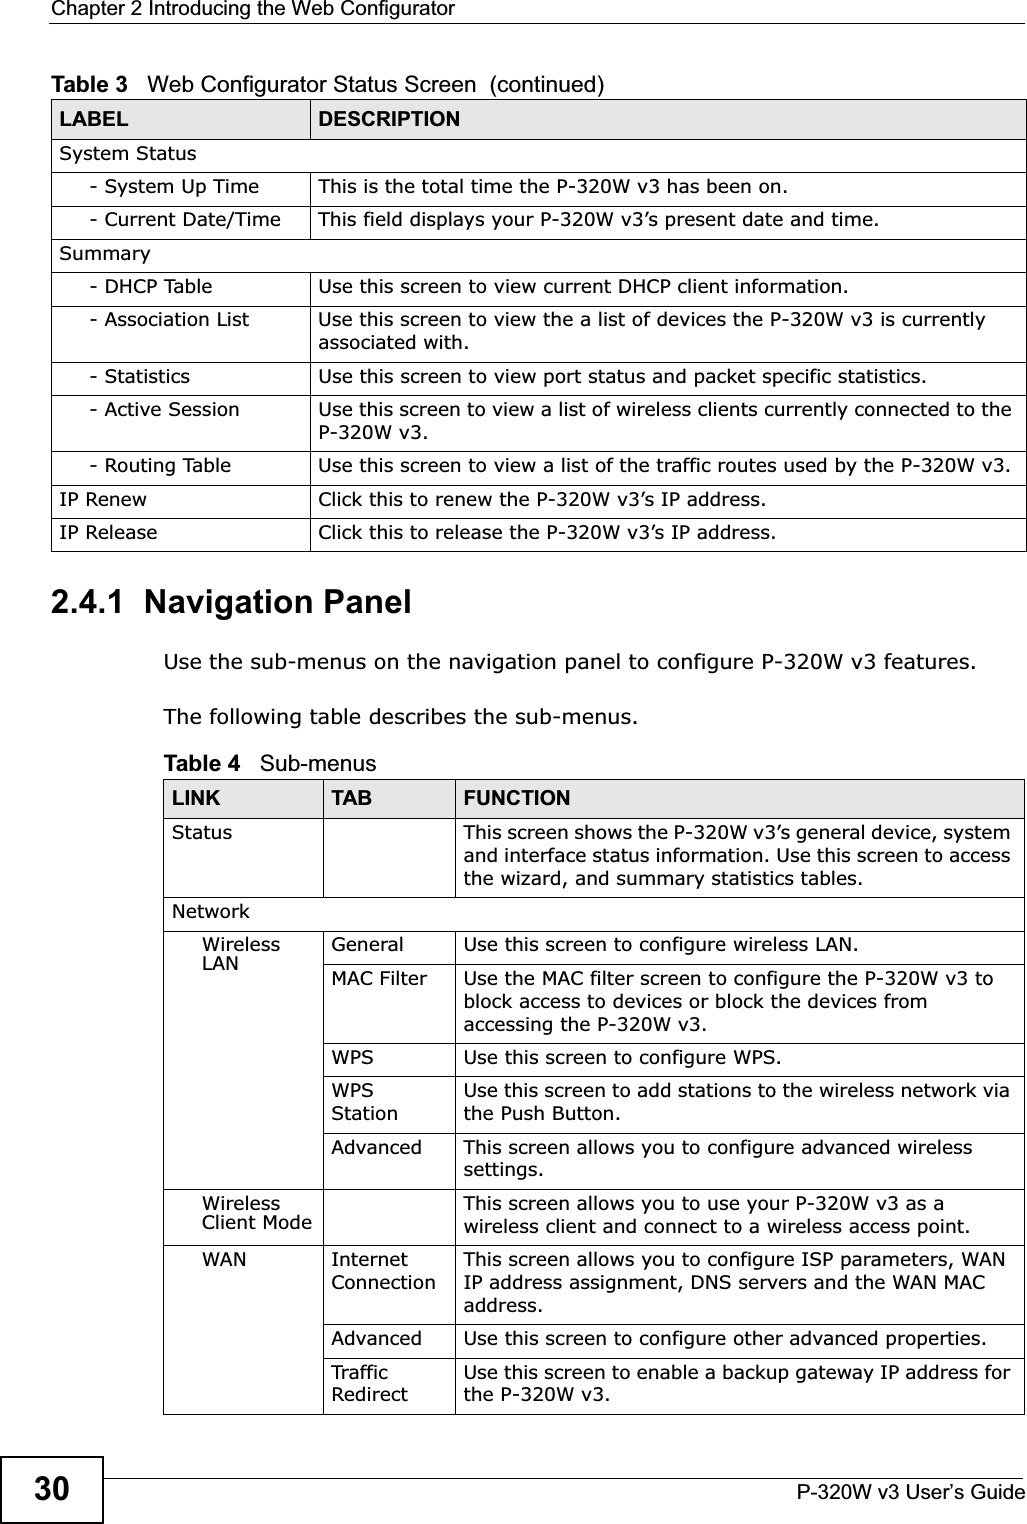 Chapter 2 Introducing the Web ConfiguratorP-320W v3 User’s Guide302.4.1  Navigation PanelUse the sub-menus on the navigation panel to configure P-320W v3 features. The following table describes the sub-menus.System Status- System Up Time This is the total time the P-320W v3 has been on.- Current Date/Time This field displays your P-320W v3’s present date and time.Summary- DHCP Table Use this screen to view current DHCP client information.- Association List Use this screen to view the a list of devices the P-320W v3 is currently associated with.- Statistics Use this screen to view port status and packet specific statistics.- Active Session Use this screen to view a list of wireless clients currently connected to the P-320W v3.- Routing Table Use this screen to view a list of the traffic routes used by the P-320W v3. IP Renew  Click this to renew the P-320W v3’s IP address.IP Release Click this to release the P-320W v3’s IP address. Table 3   Web Configurator Status Screen  (continued) LABEL DESCRIPTIONTable 4   Sub-menusLINK TAB FUNCTIONStatus This screen shows the P-320W v3’s general device, system and interface status information. Use this screen to access the wizard, and summary statistics tables.NetworkWirelessLAN General Use this screen to configure wireless LAN.MAC Filter Use the MAC filter screen to configure the P-320W v3 to block access to devices or block the devices from accessing the P-320W v3.WPS Use this screen to configure WPS.WPS StationUse this screen to add stations to the wireless network via the Push Button.Advanced This screen allows you to configure advanced wireless settings.WirelessClient Mode This screen allows you to use your P-320W v3 as a wireless client and connect to a wireless access point.WAN Internet ConnectionThis screen allows you to configure ISP parameters, WAN IP address assignment, DNS servers and the WAN MAC address.Advanced Use this screen to configure other advanced properties.Traffic RedirectUse this screen to enable a backup gateway IP address for the P-320W v3.